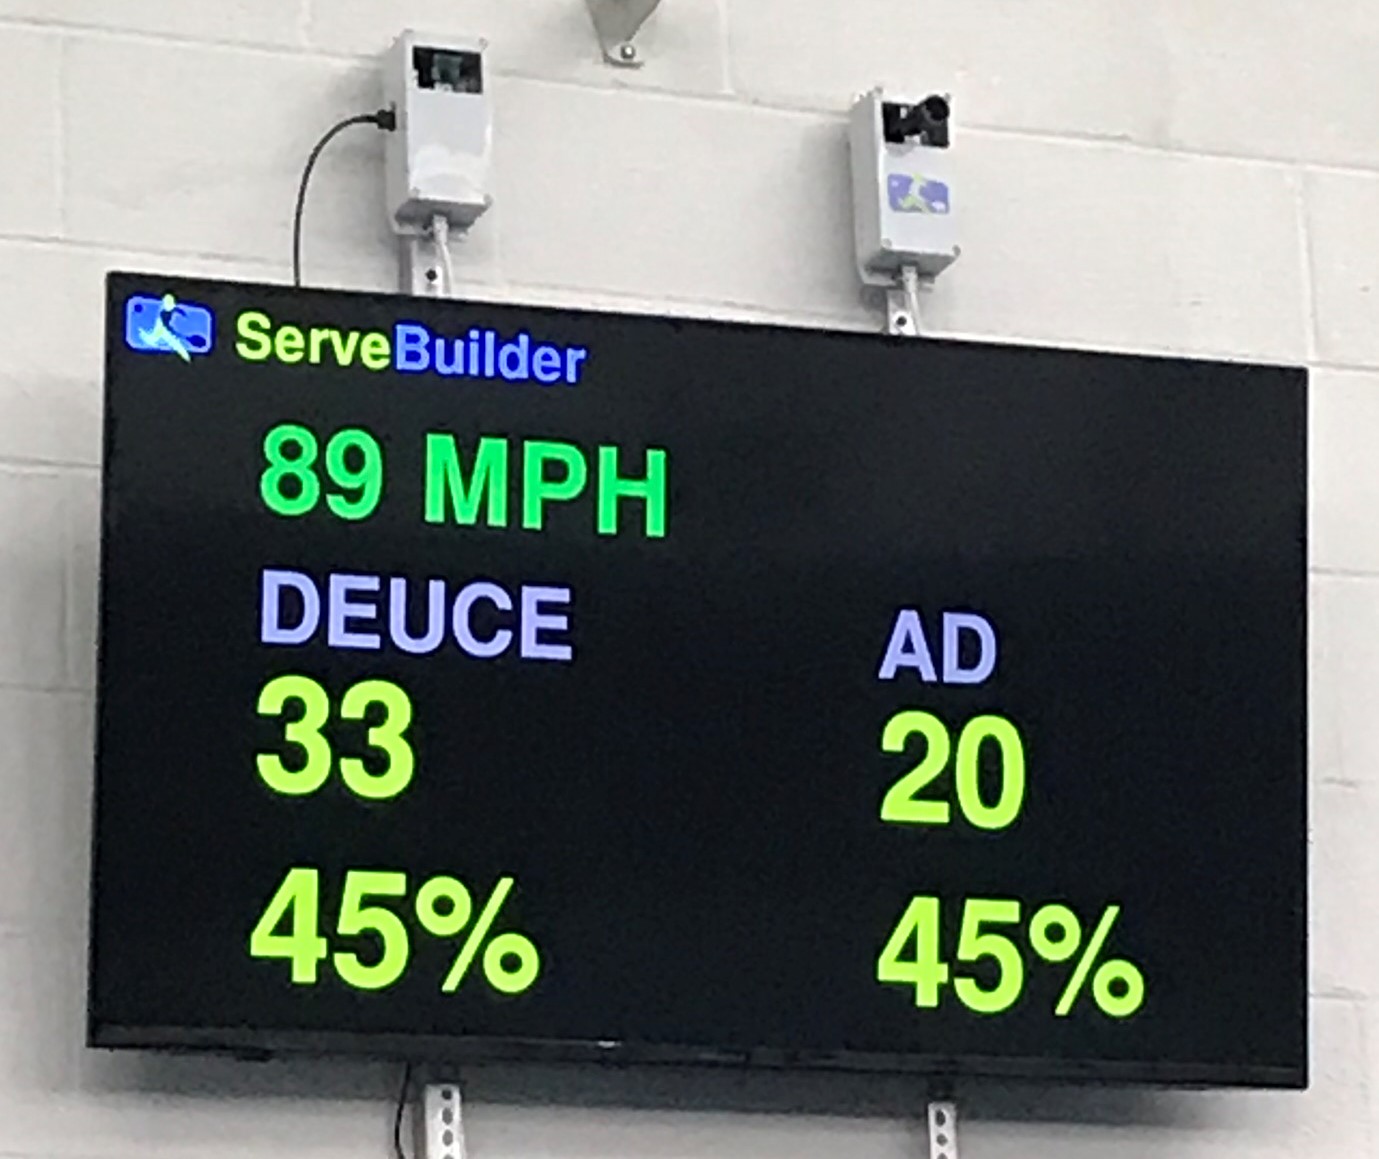 Scoreboard showing serve tallies, percentages and MPH during automated serving drill